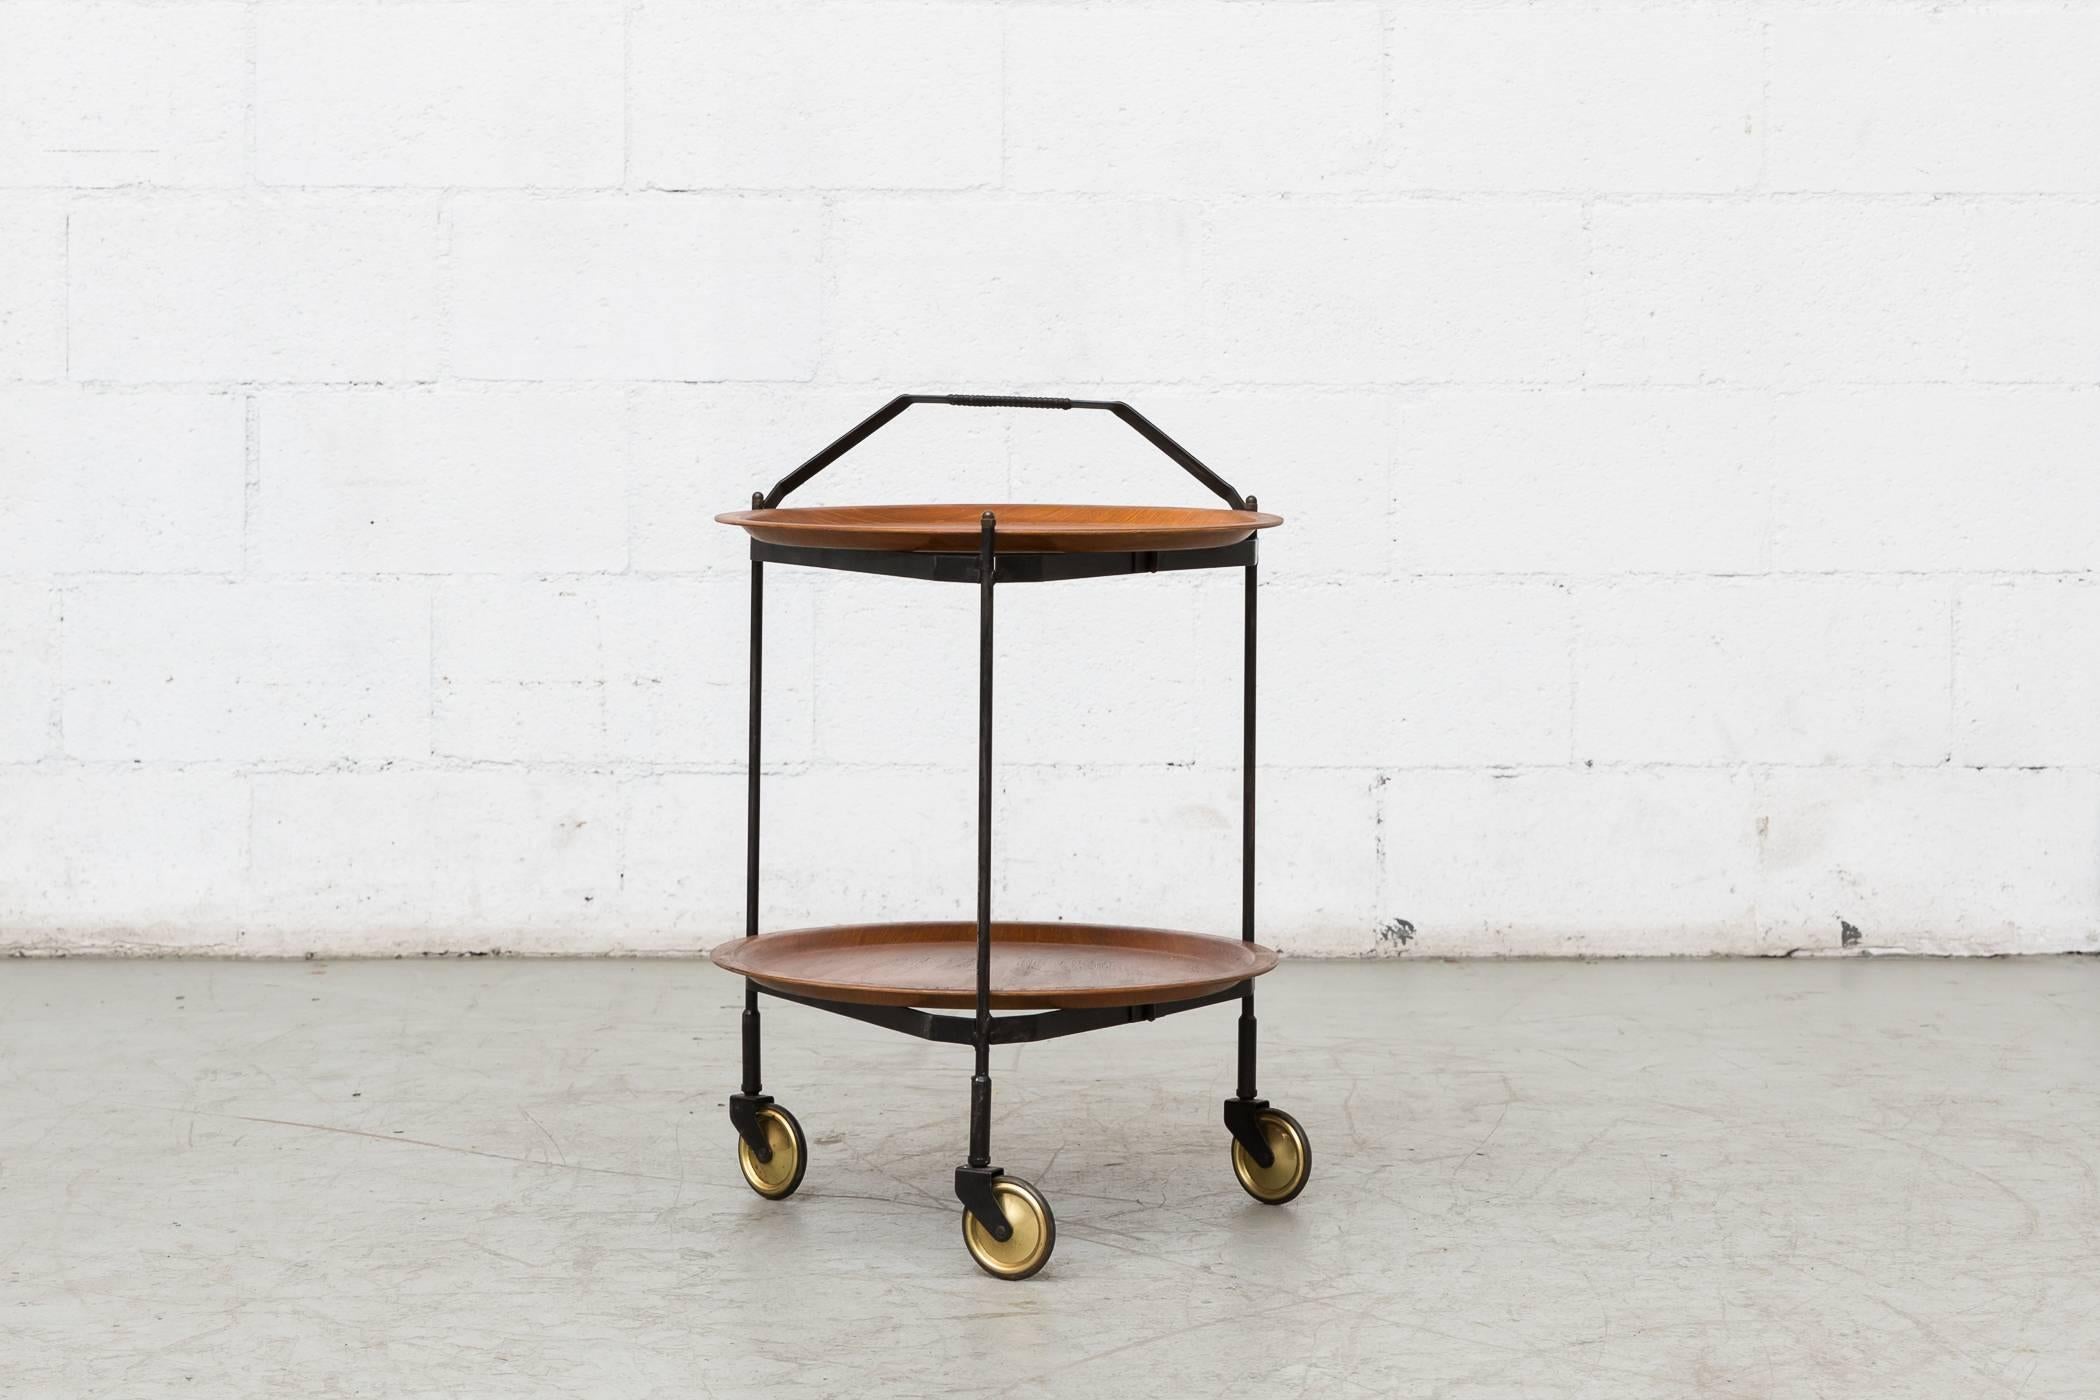 Midcentury rolling cart with two removable teak trays on collapsible black enameled metal frame and leather wrapped handle. Original brass wheels. Leather wrapped handle has been stained black, otherwise original condition.